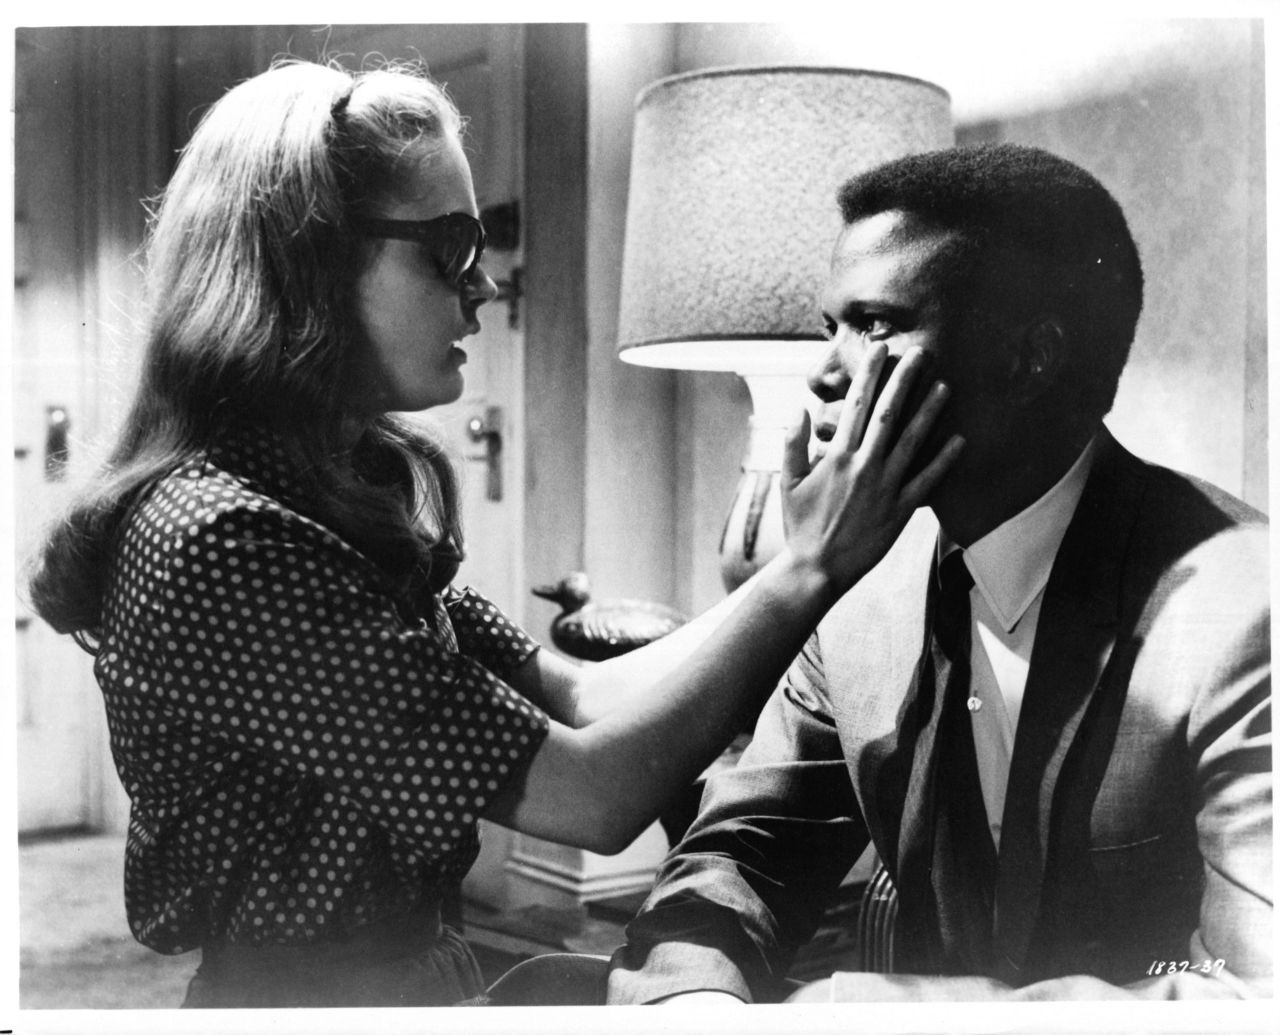 In 1965's "A Patch of Blue," Elizabeth Hartman plays a blind woman who develops a romance with Poitier's character, an office worker. The interracial romance was tough stuff for the time, and a scene of Hartman and Poitier kissing was cut from the film's showings in the South. 